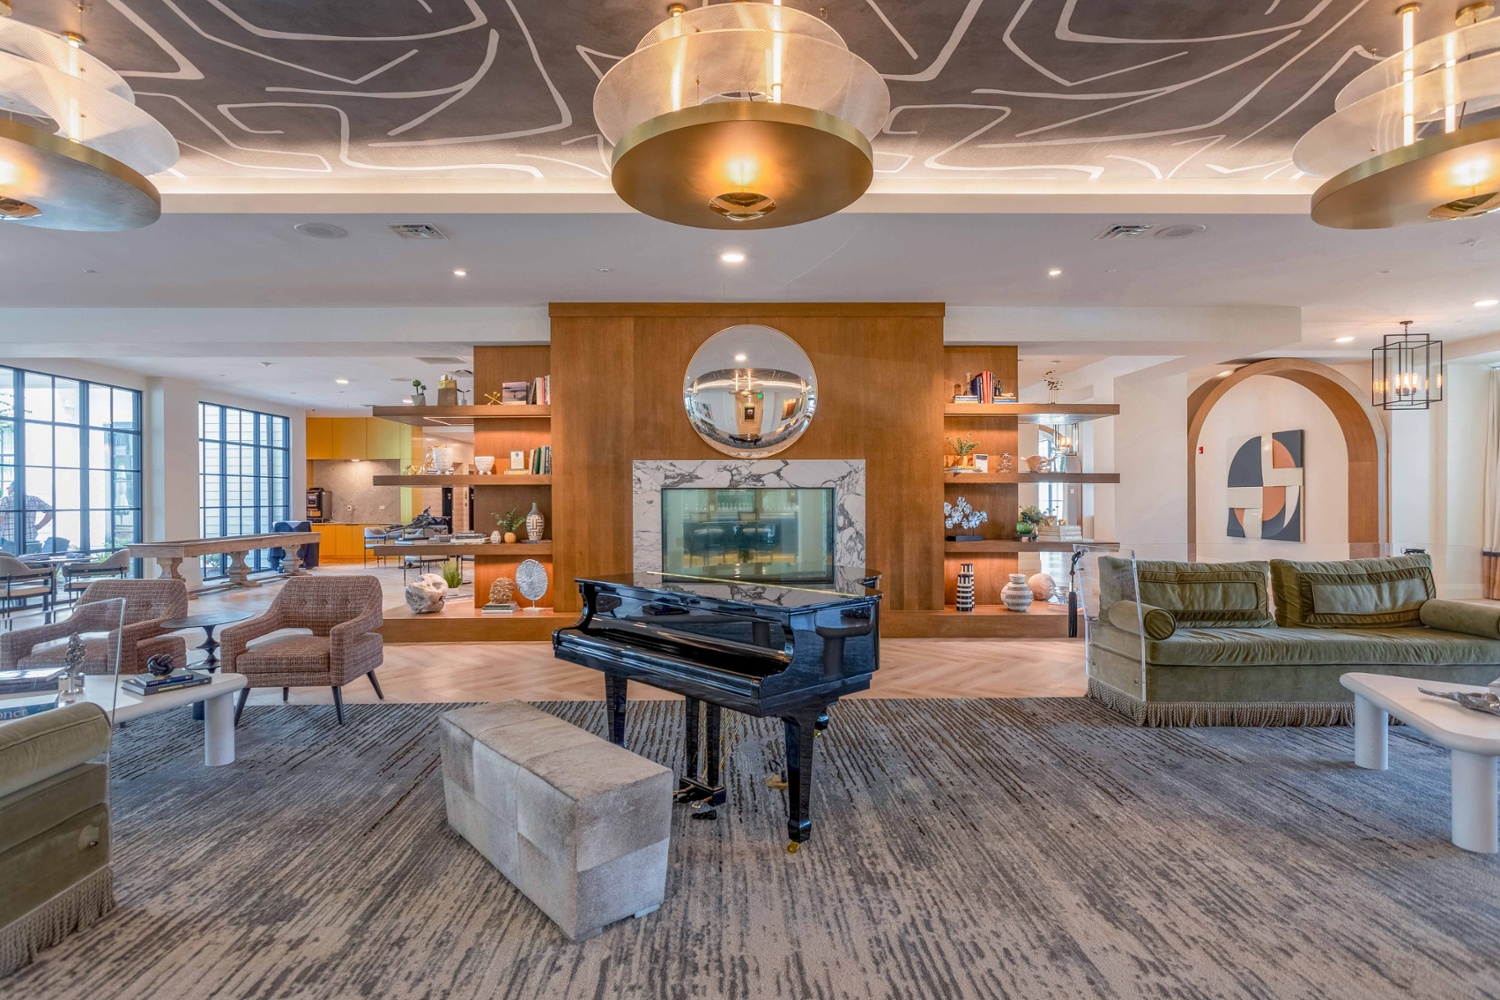 Opus senior living lobby area with piano in the middle